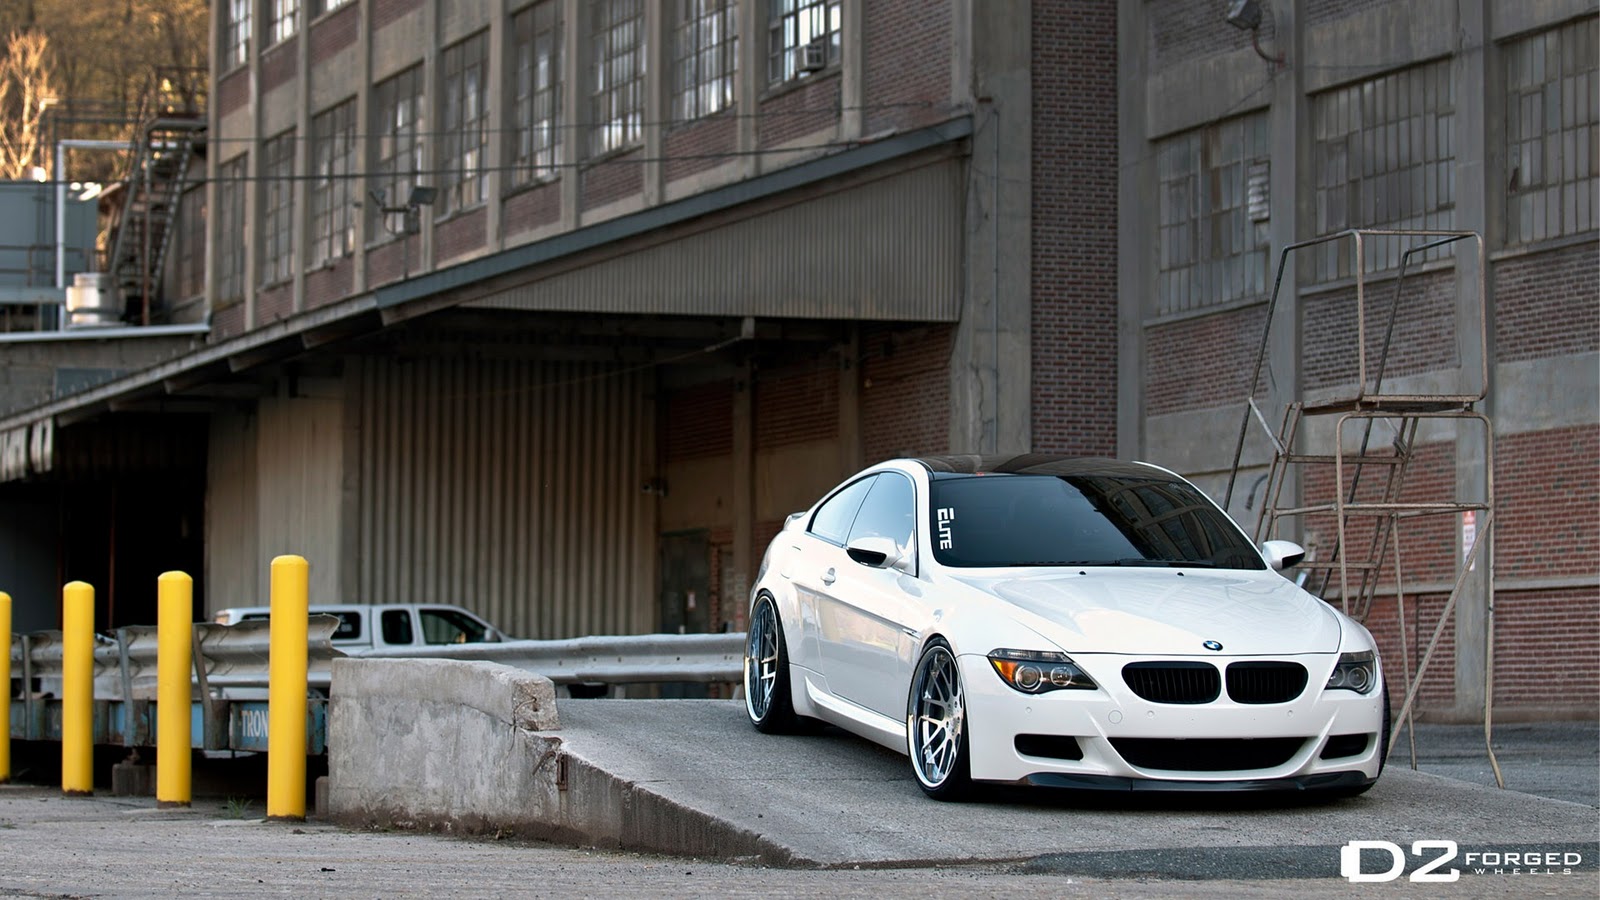 Bmw M6 HD Wallpaper Hot Unique And Stock Photos